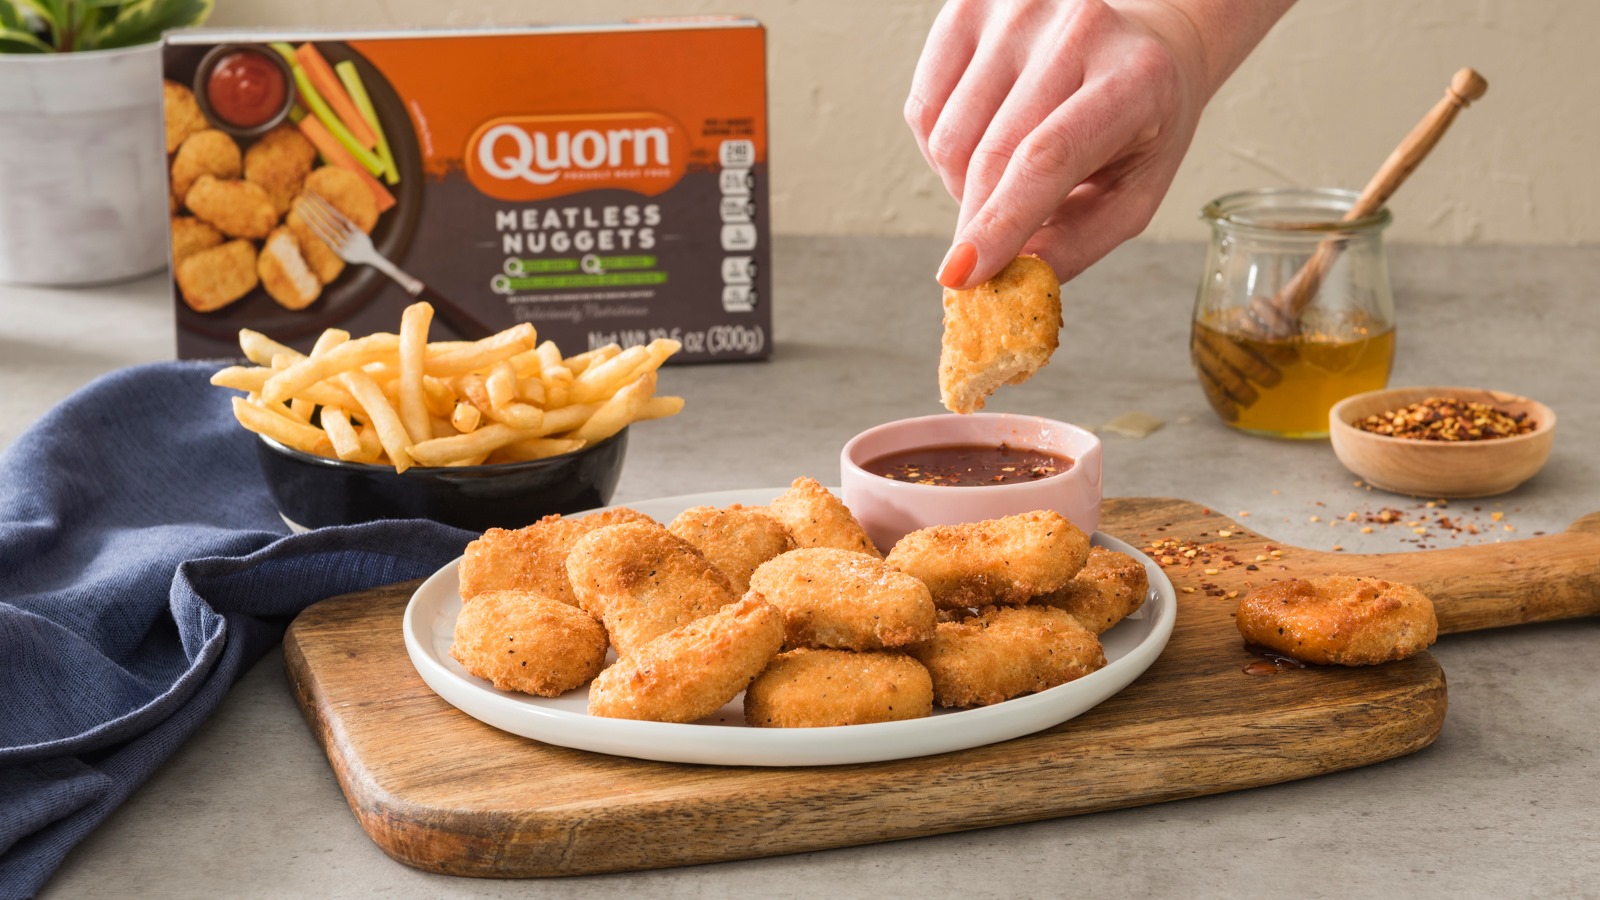 Quorn Chicken Meatless Nuggets